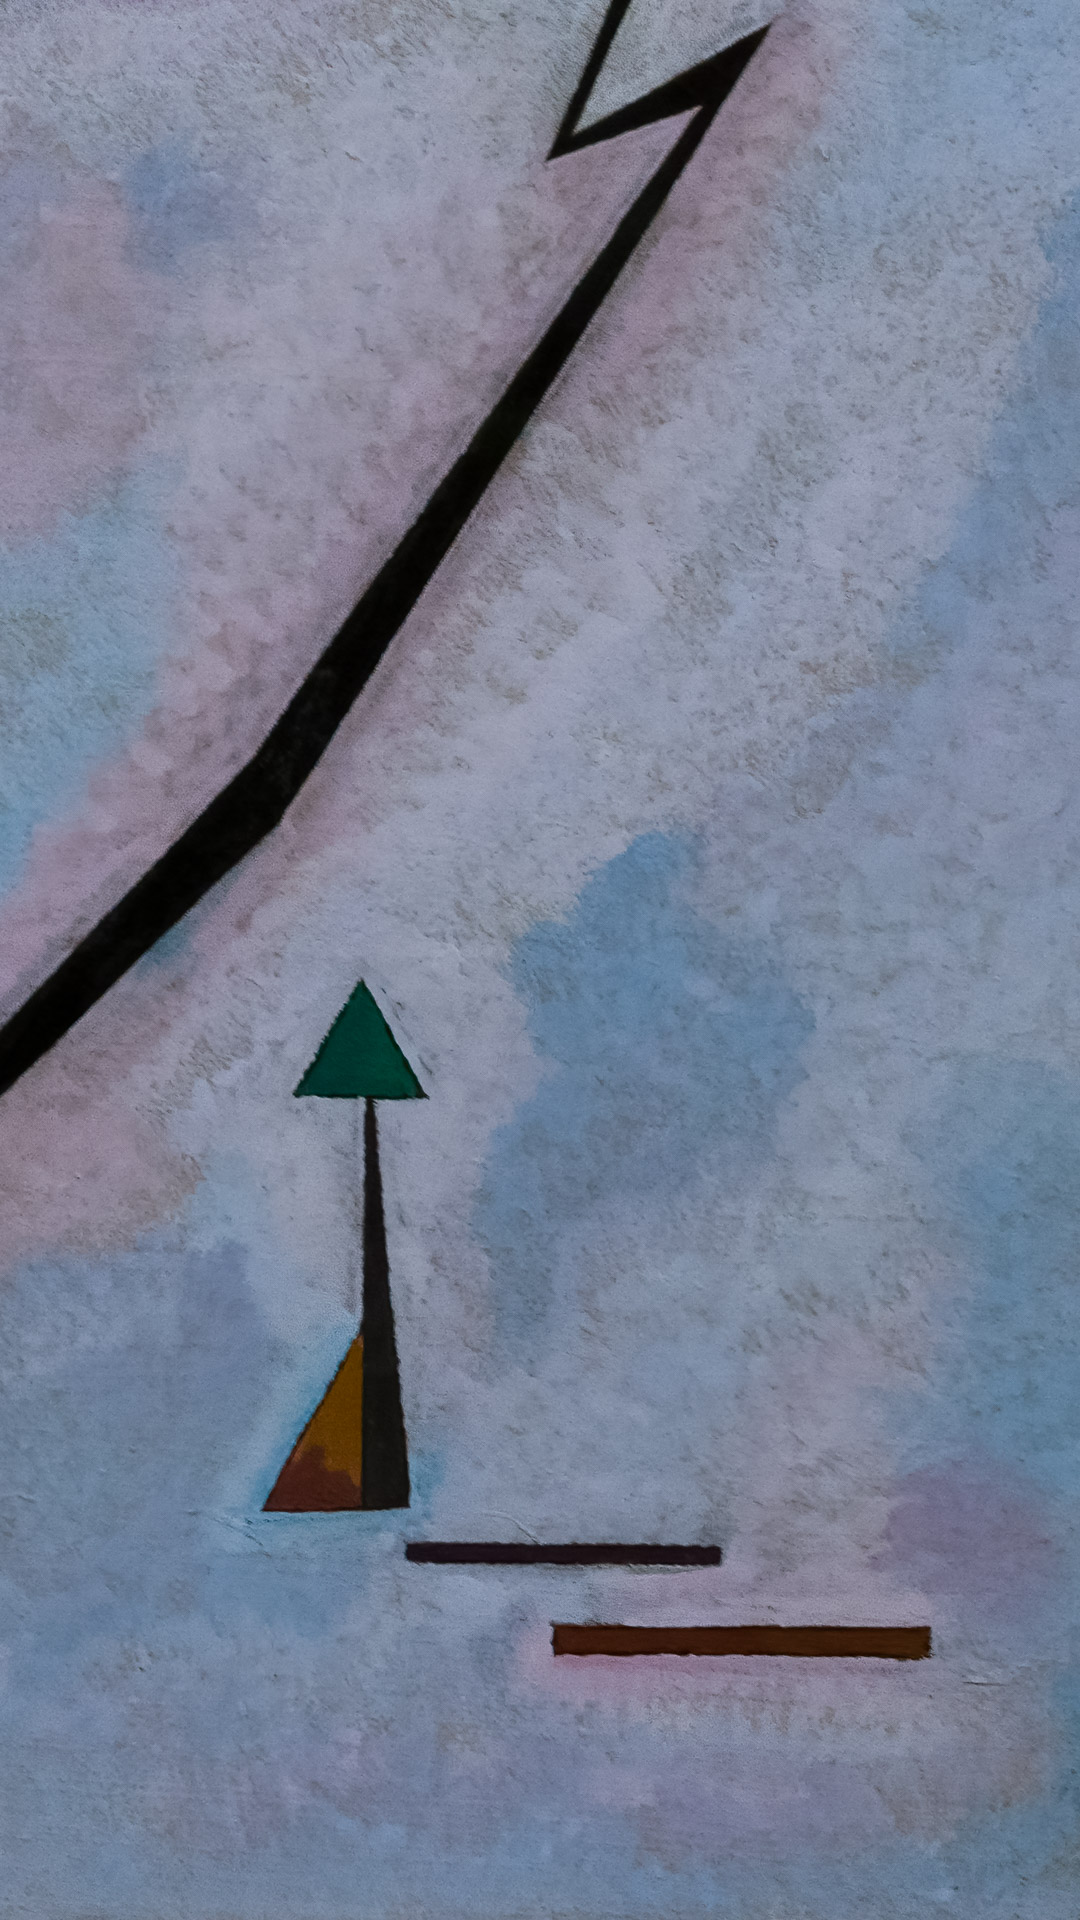 Experience the abstract genius of Kandinsky, as vibrant colors and dynamic shapes enliven your iPhone wallpaper.